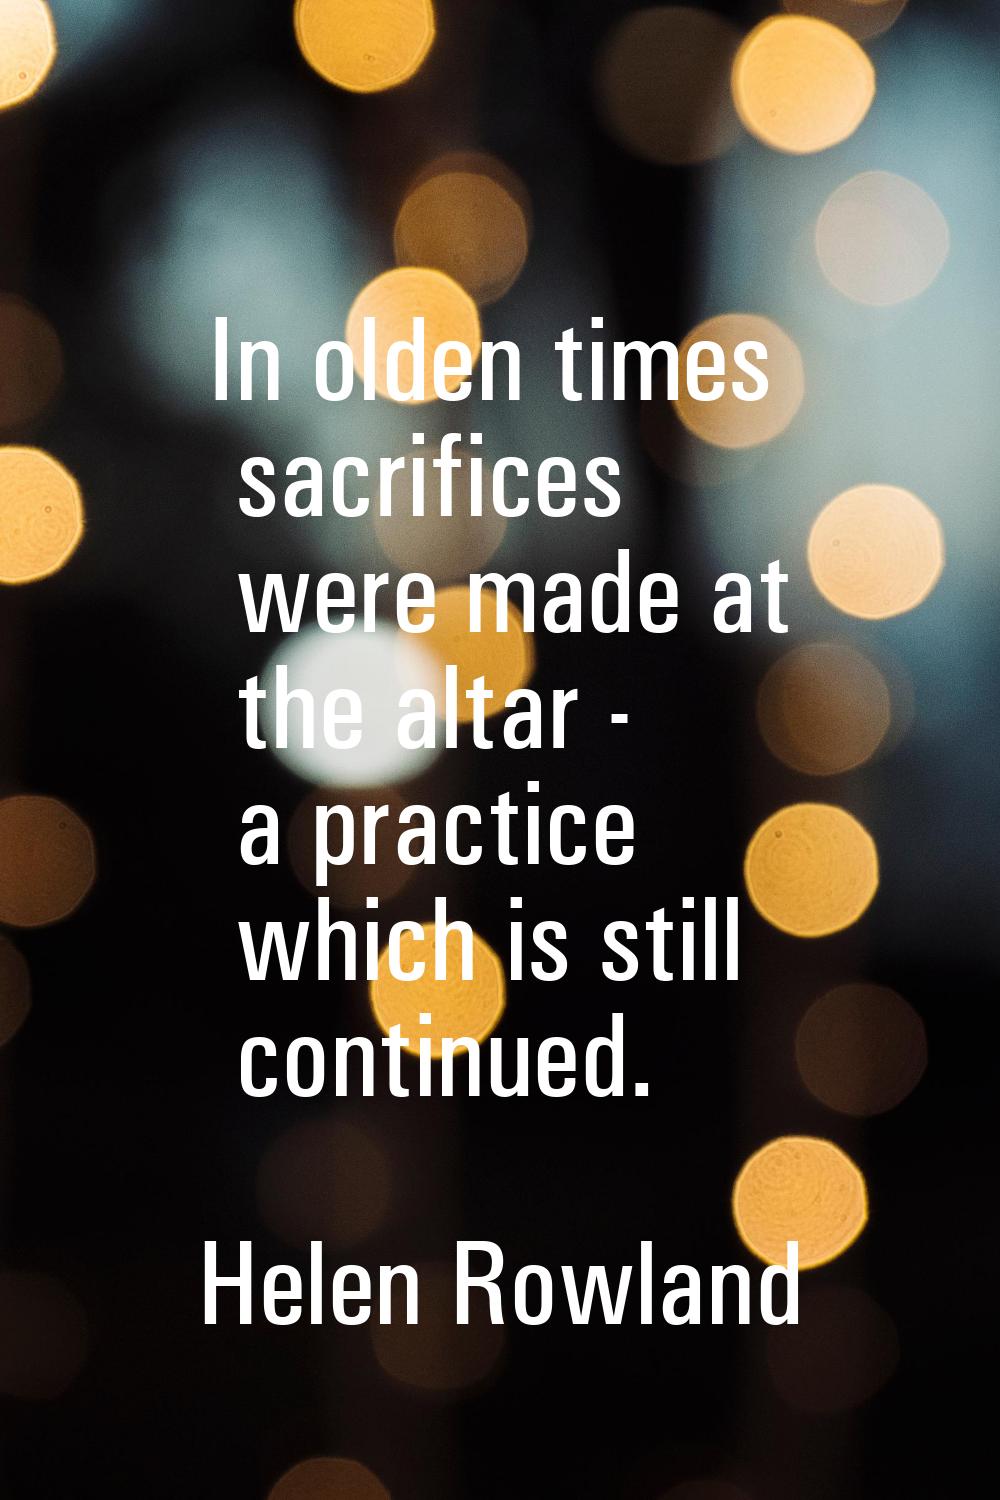 In olden times sacrifices were made at the altar - a practice which is still continued.